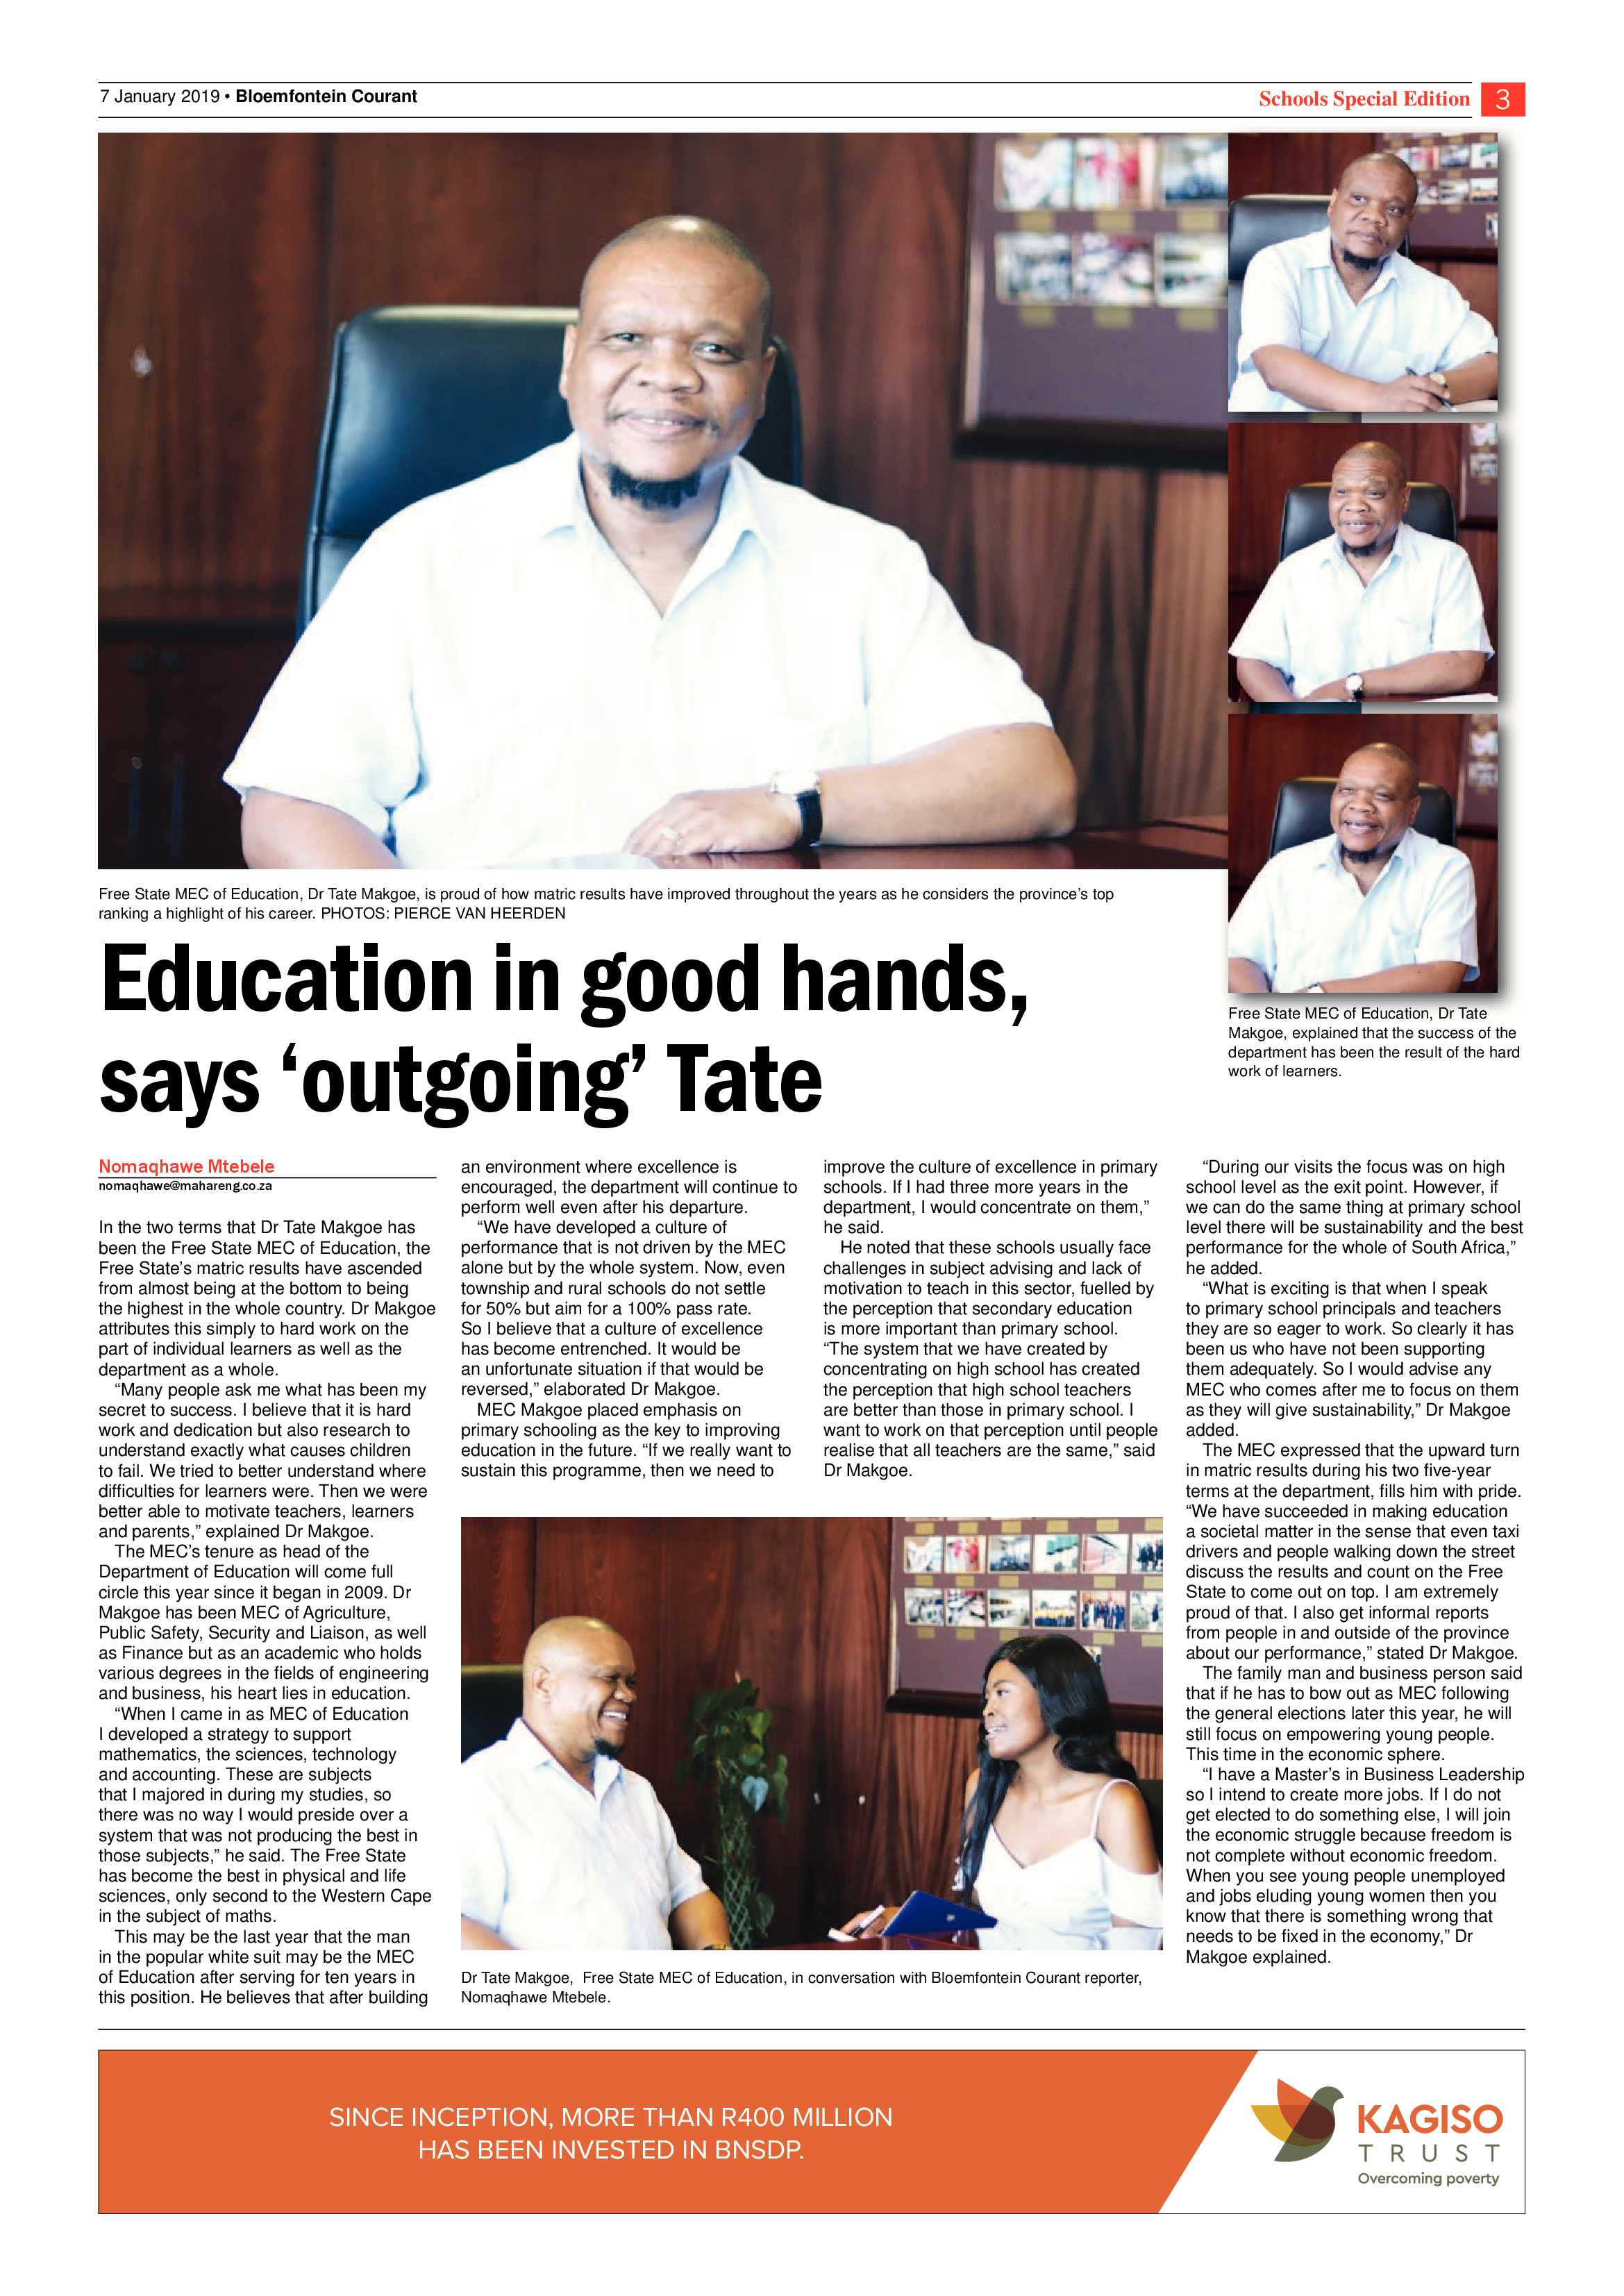 courant-school-edition-07-january-2019-epapers-page-3